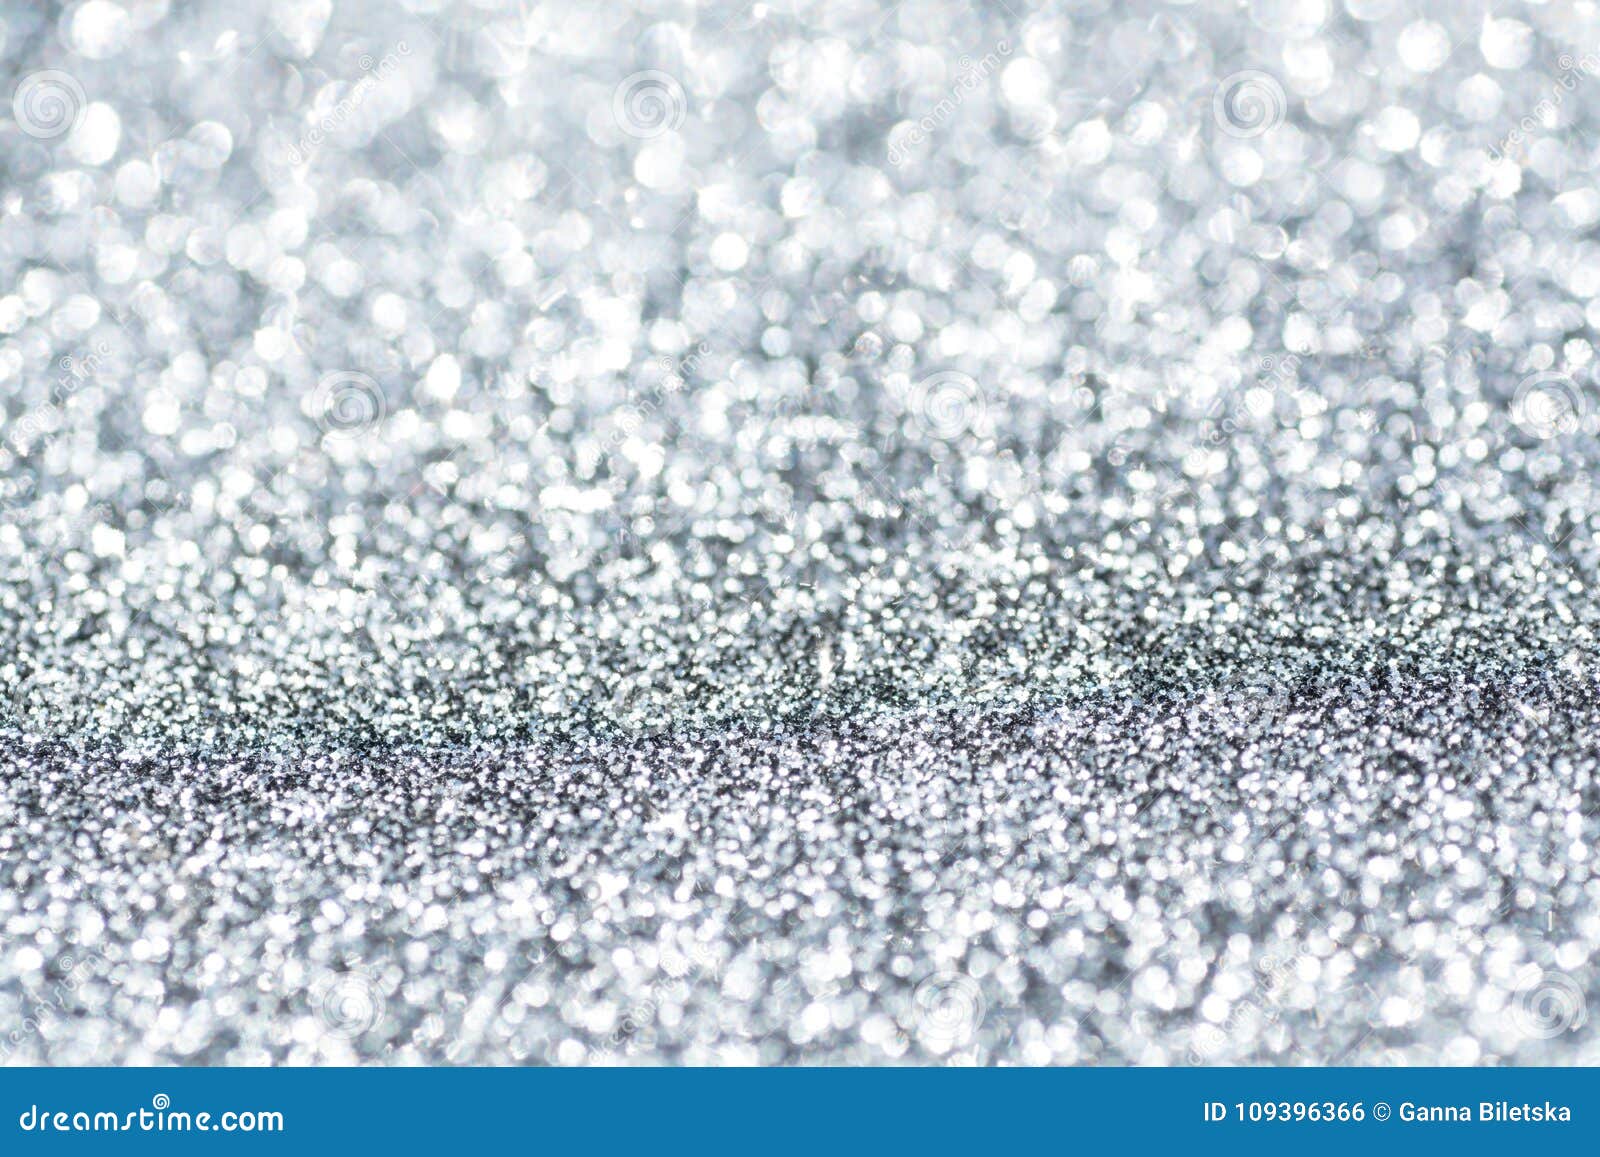 Brilliant Sparkling Silver Background Abstract. Stock Photo - Image of ...